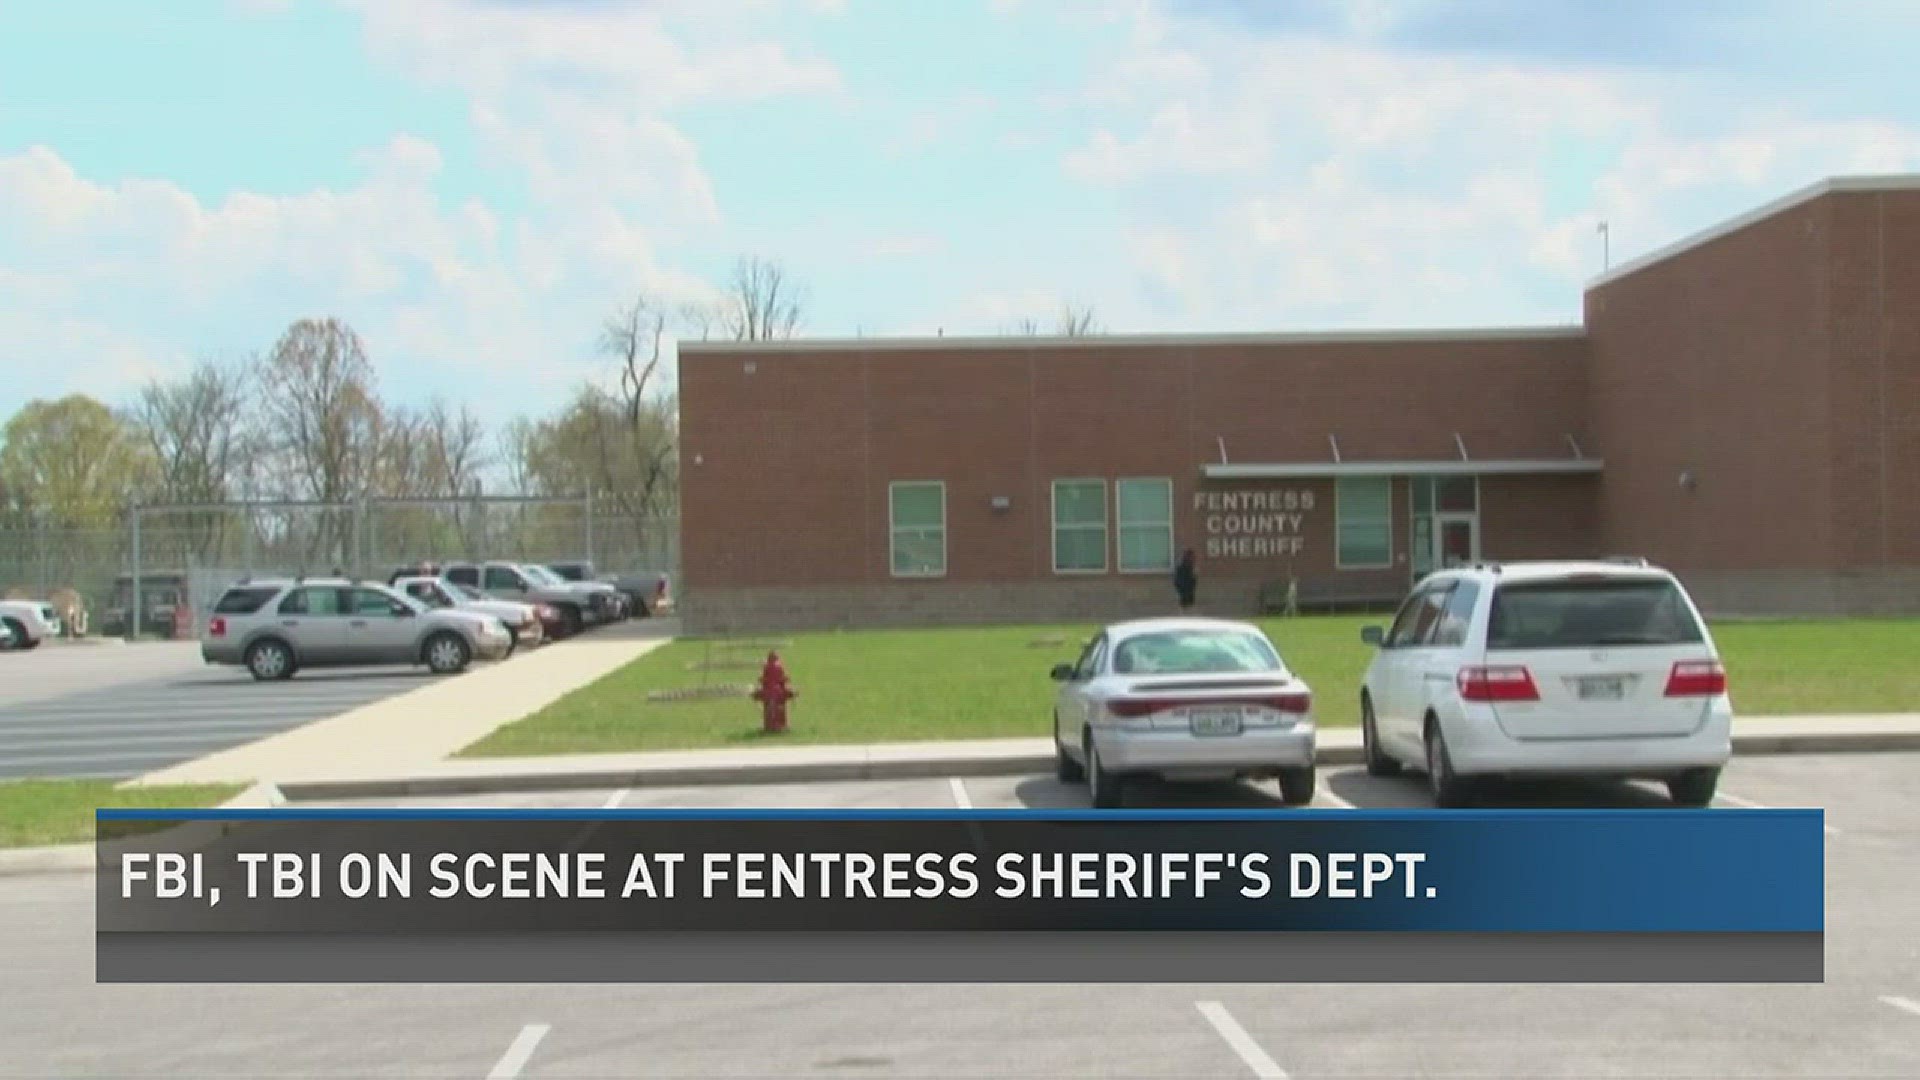 Assistant Special Agent in Charge of the FBI in Nashville Matthew Espenshade told 10News that they are looking into allegations of impropriety at the Fentress County Jail and Sheriff's Department. (4/11/17 4 p.m.)